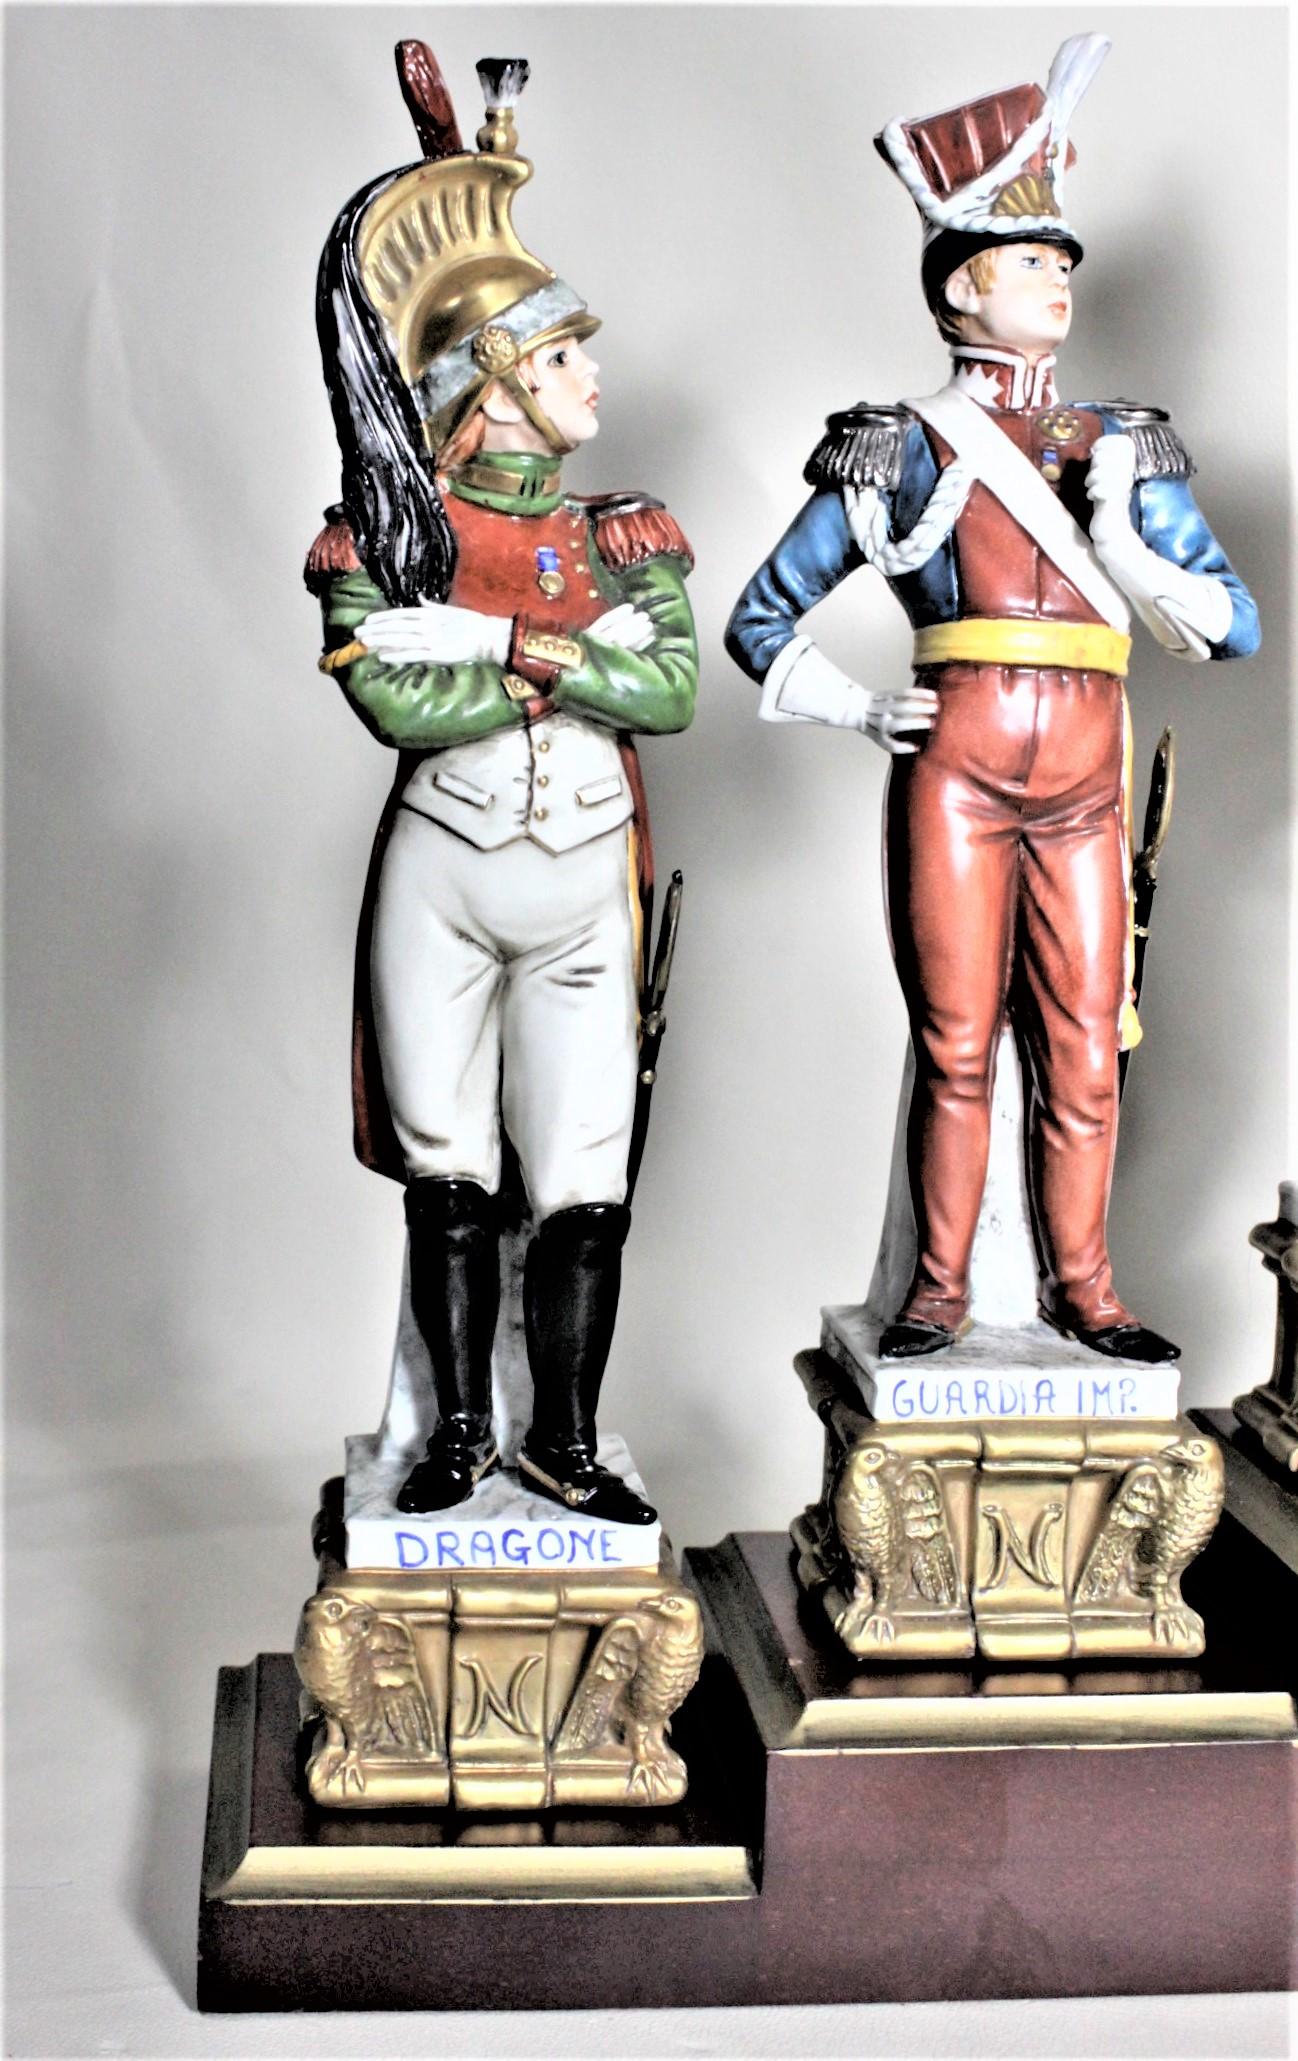 This set of eight porcelain figurines was made by the Capodimonte factor of Italy in circa 1980 in the Renaissance style. Seven of the figurines depict famous military figures and are very detailed in their hand painted finishes. We are unclear as